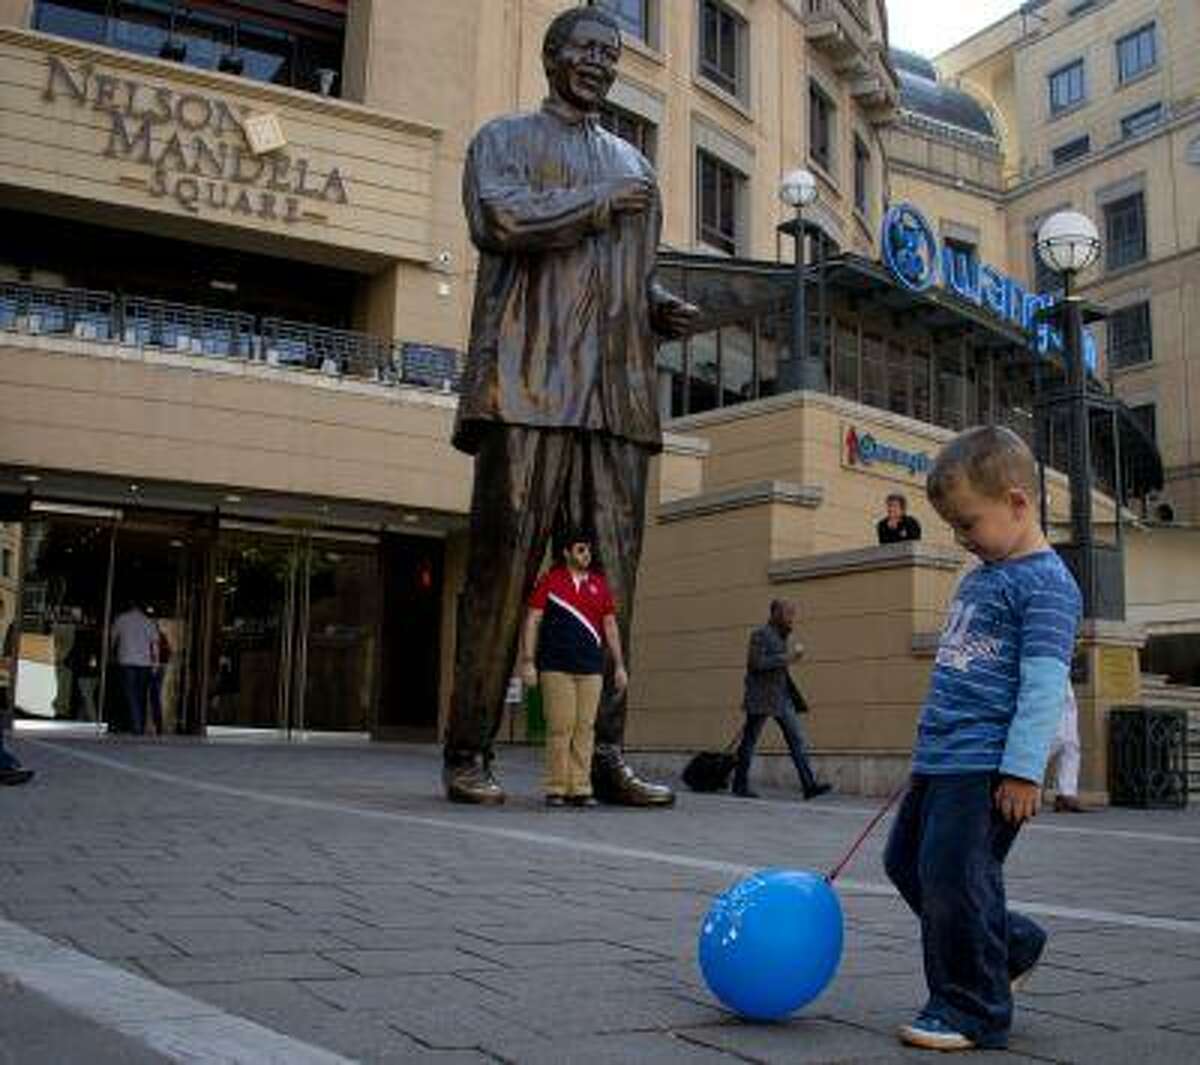 A young boy plays with a balloon in front of a giant bronze statue of Nelson Mandela at Nelson Mandela square in the north Johannesburg suburb of Sandton on June 28, 2013.